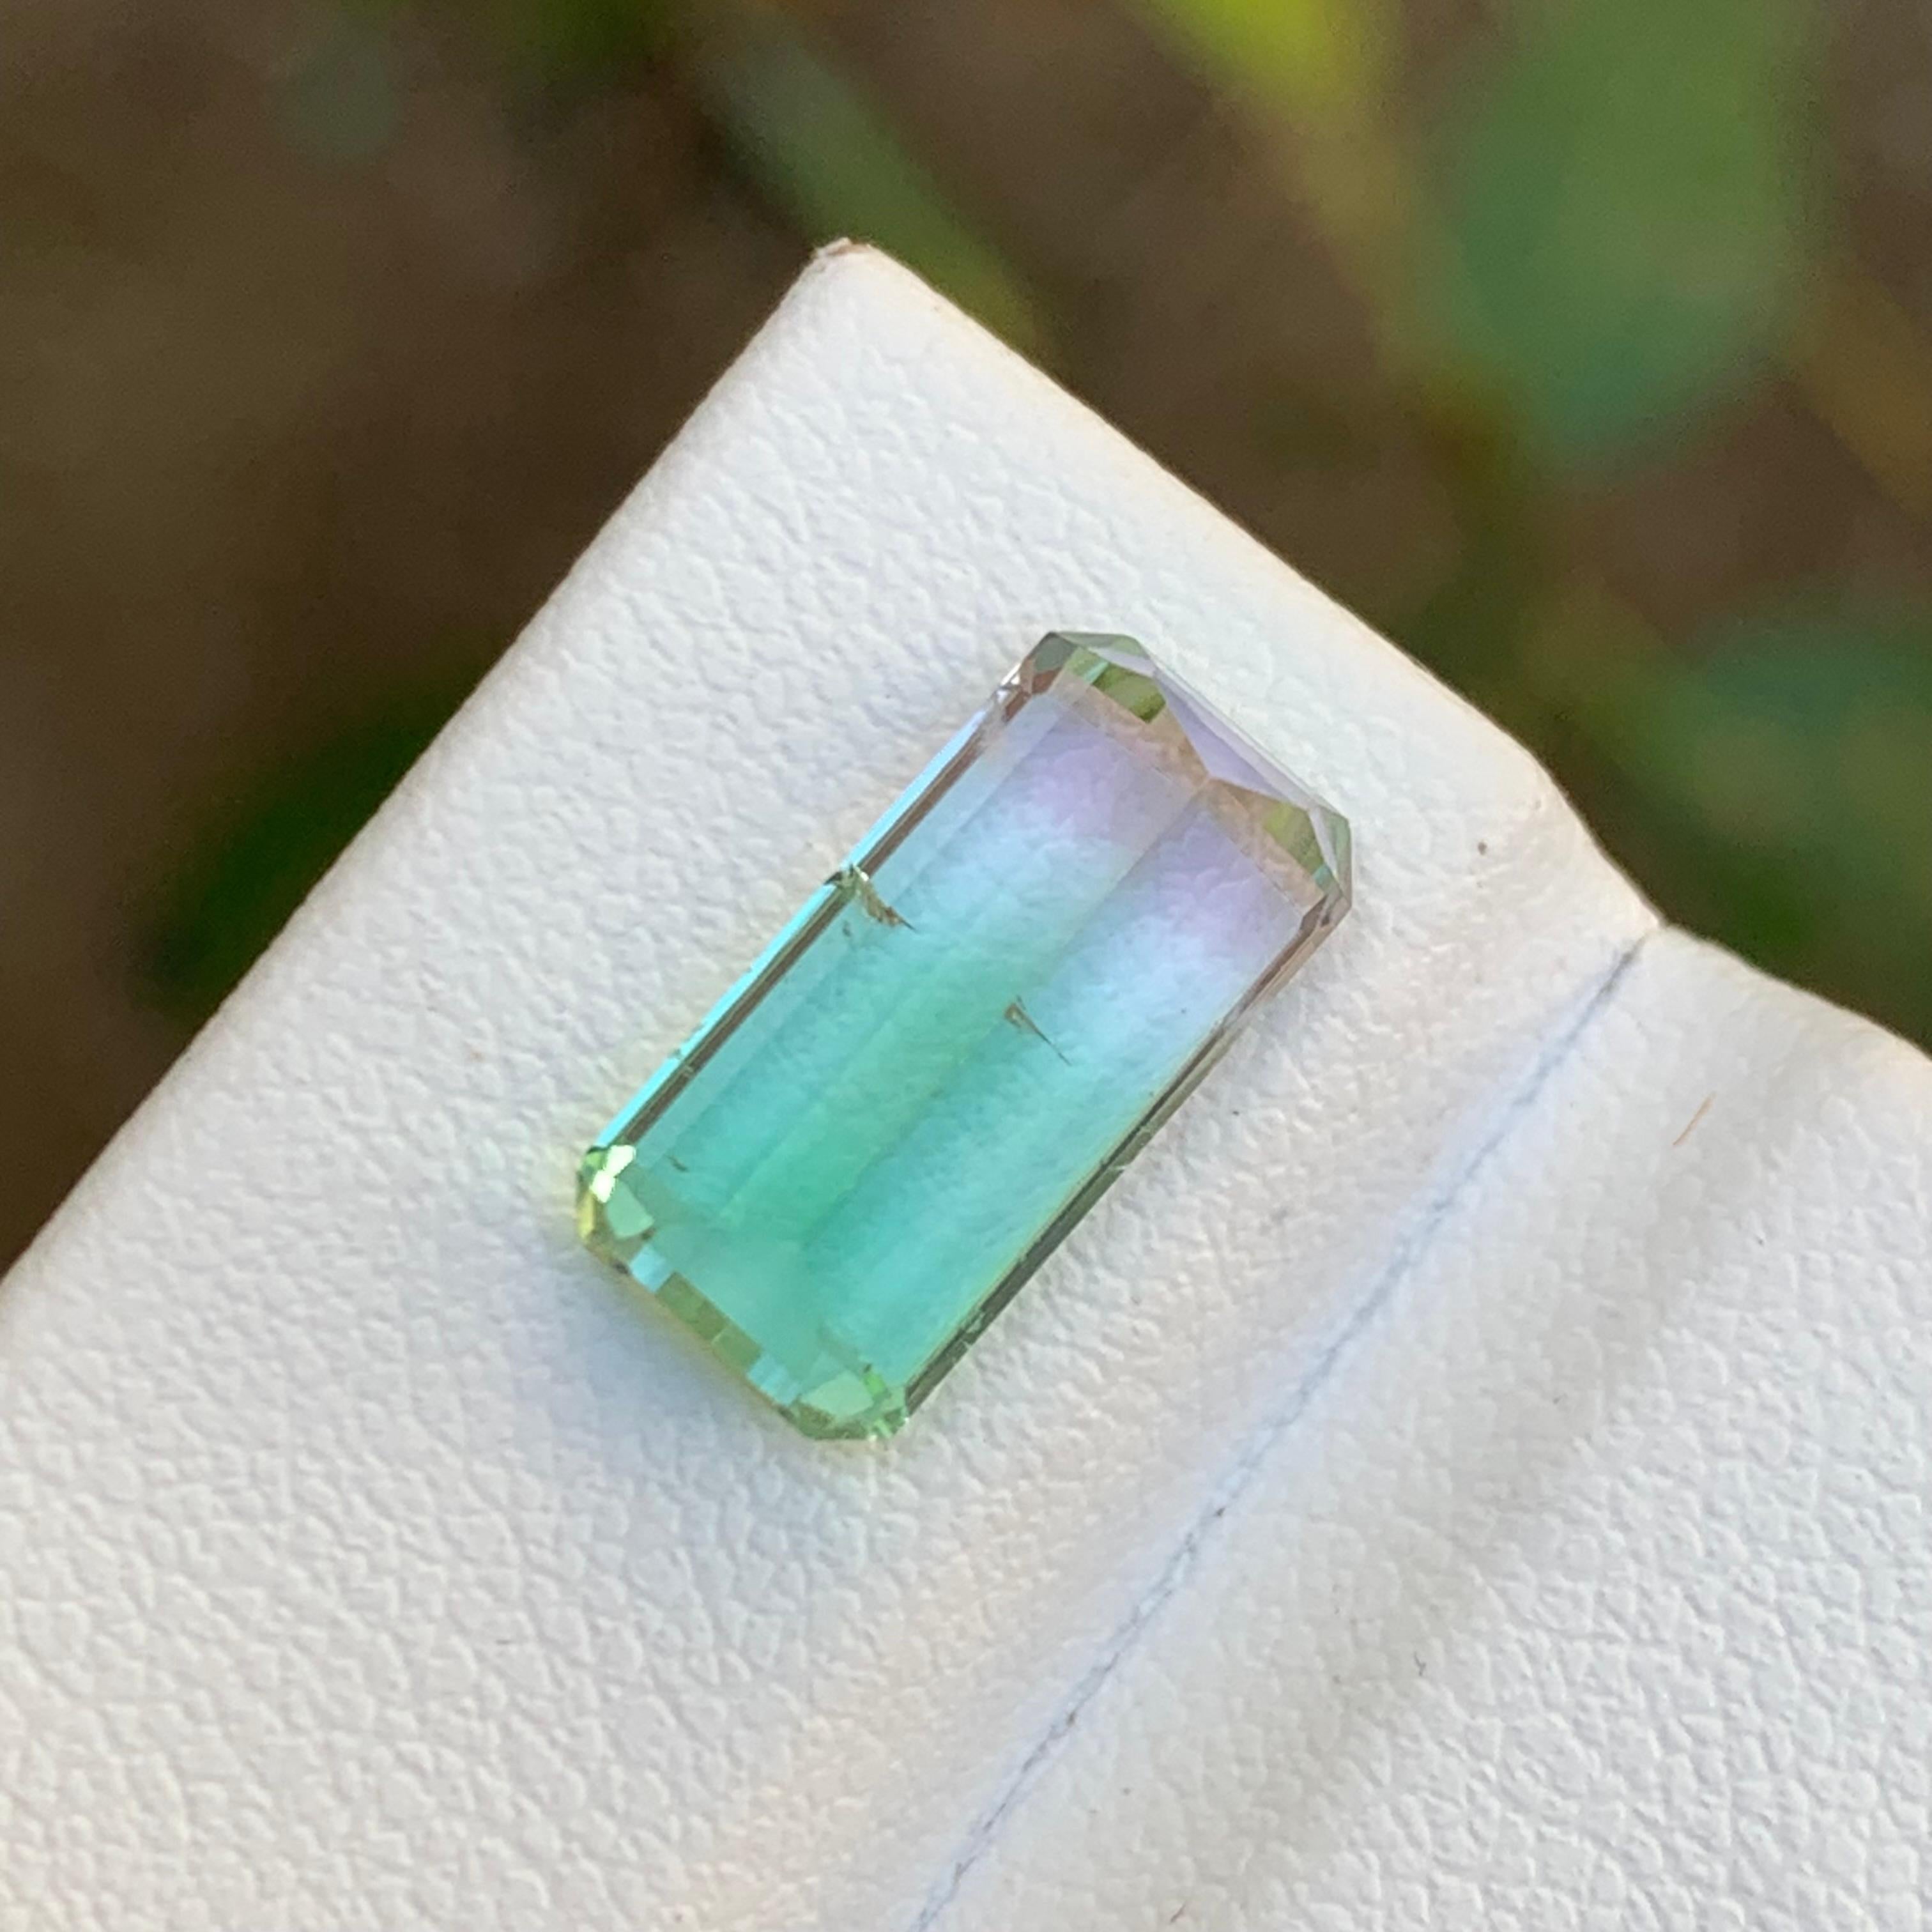 Rare Neon Bluish Green and Pink Bicolor Tourmaline Gemstone, 3.95 Ct Emerald Cut In New Condition For Sale In Peshawar, PK